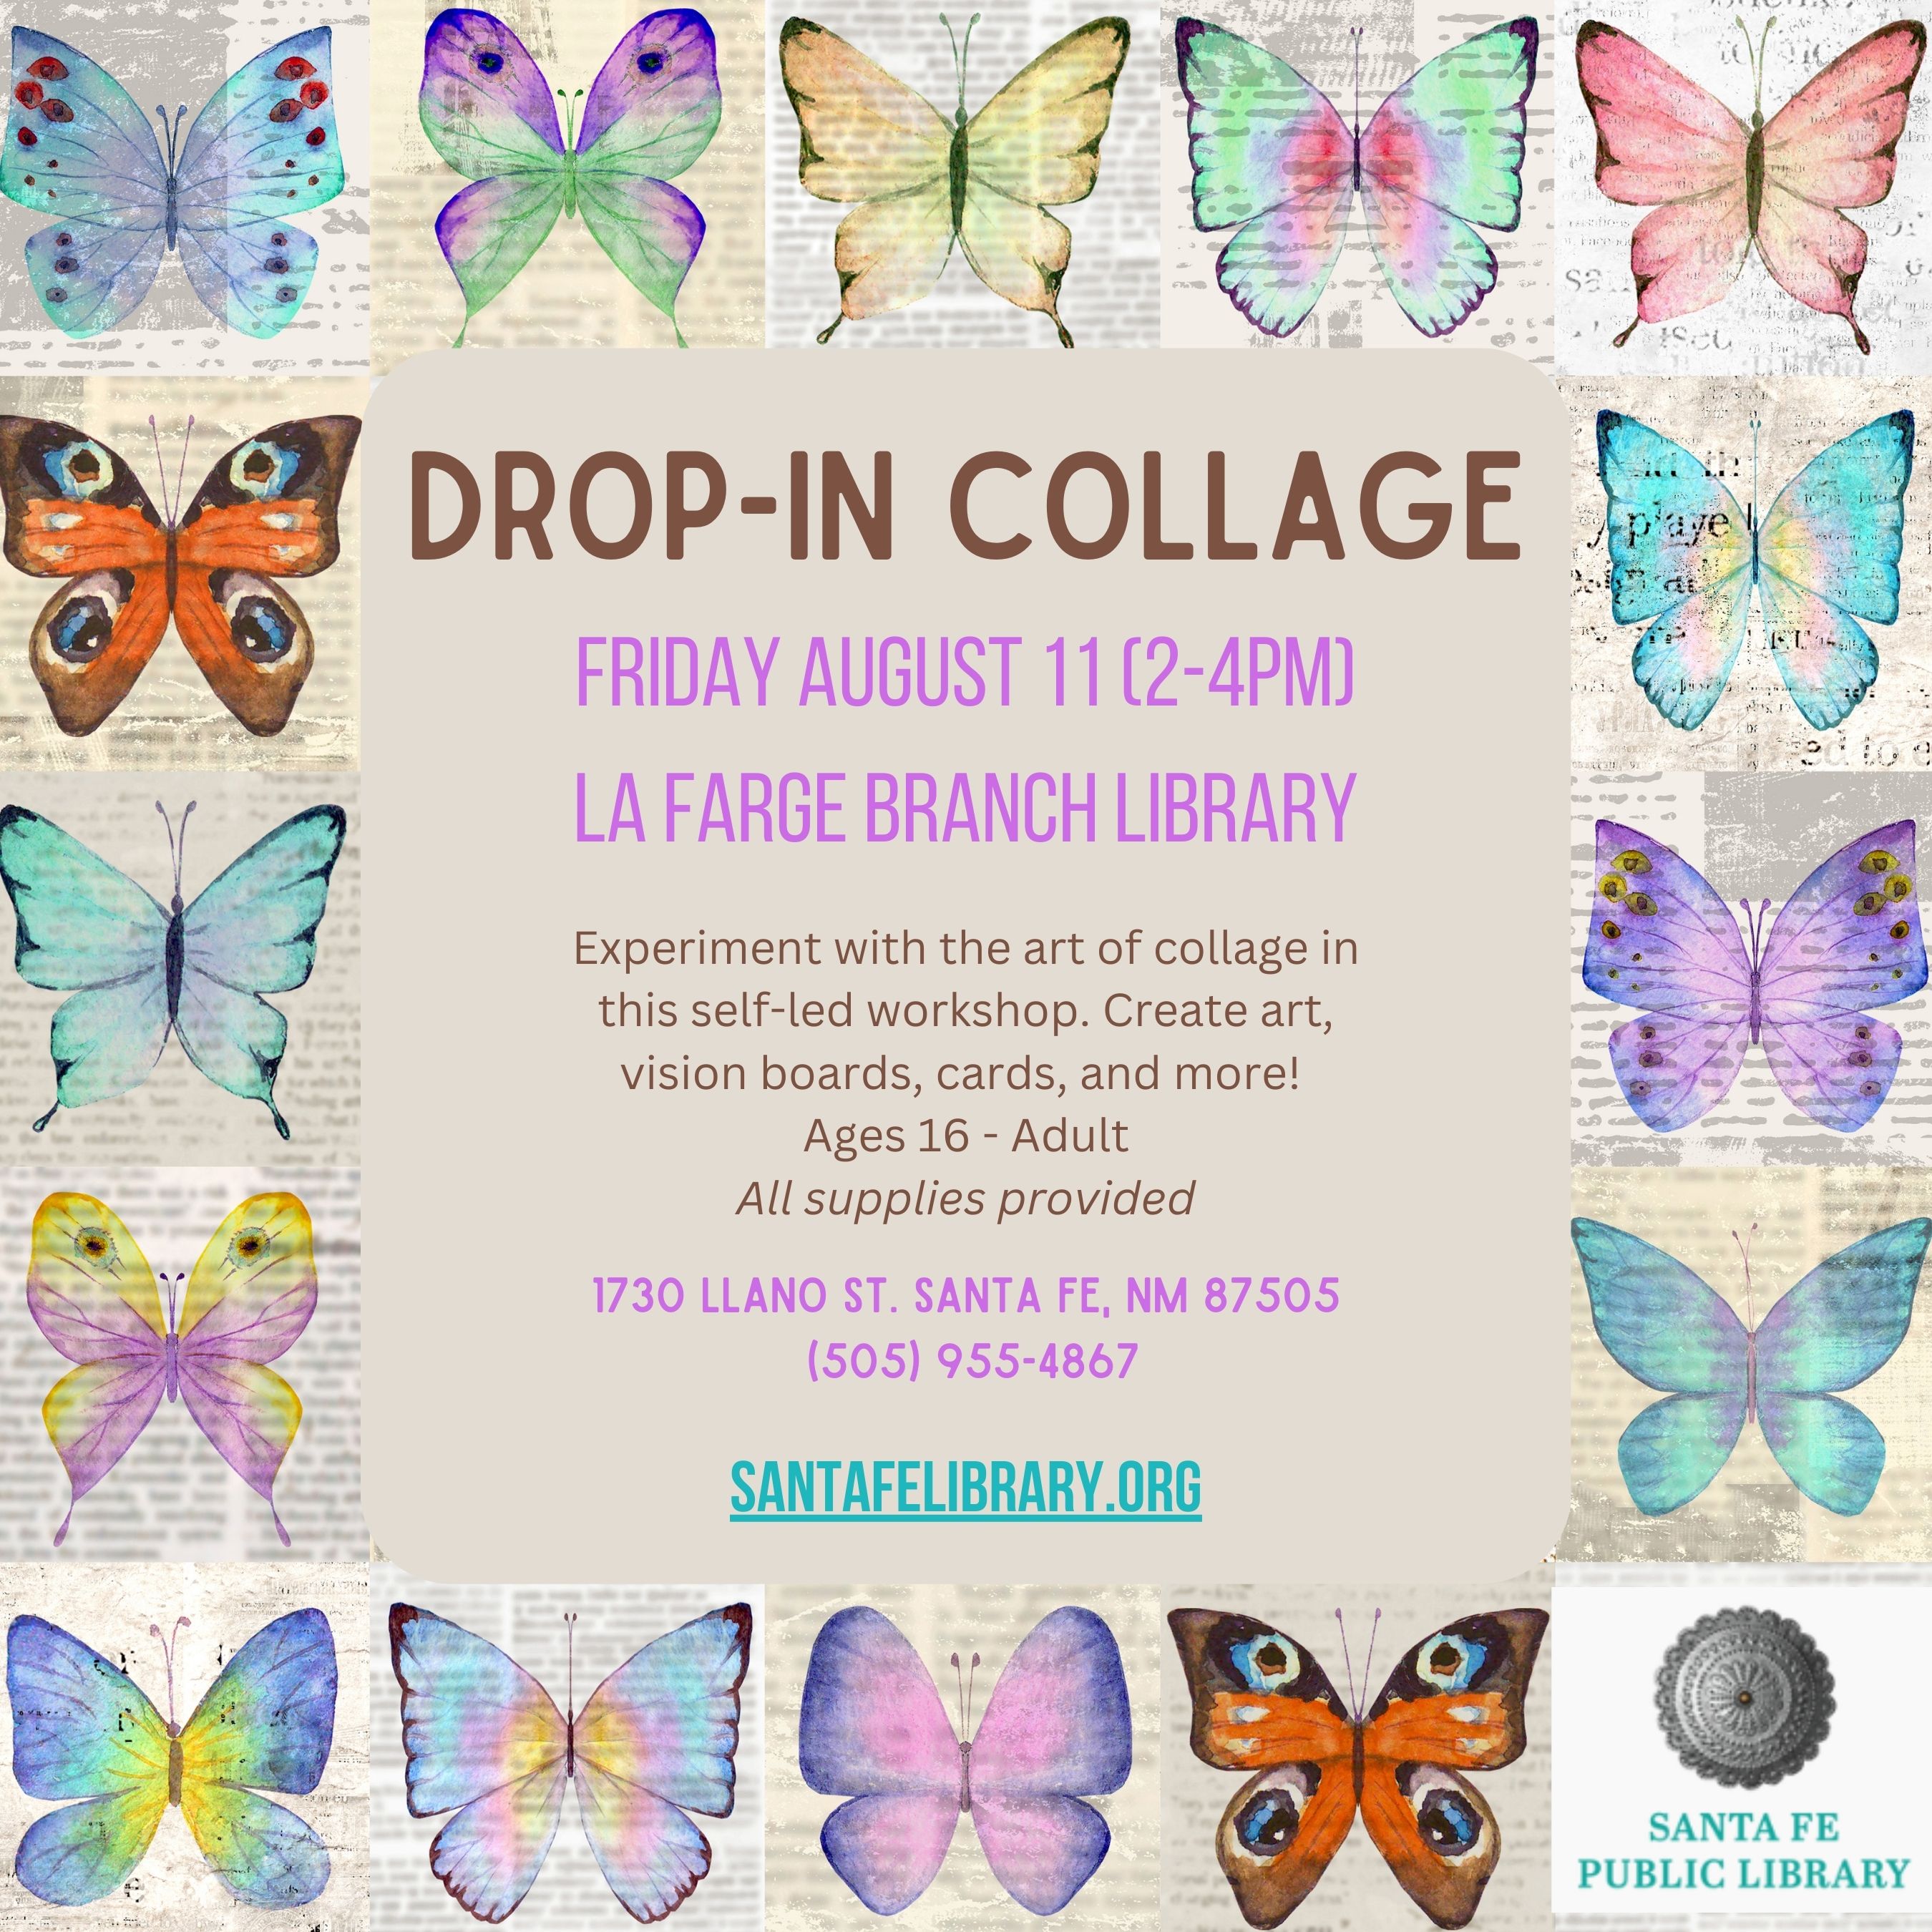 Drop-in collage promo